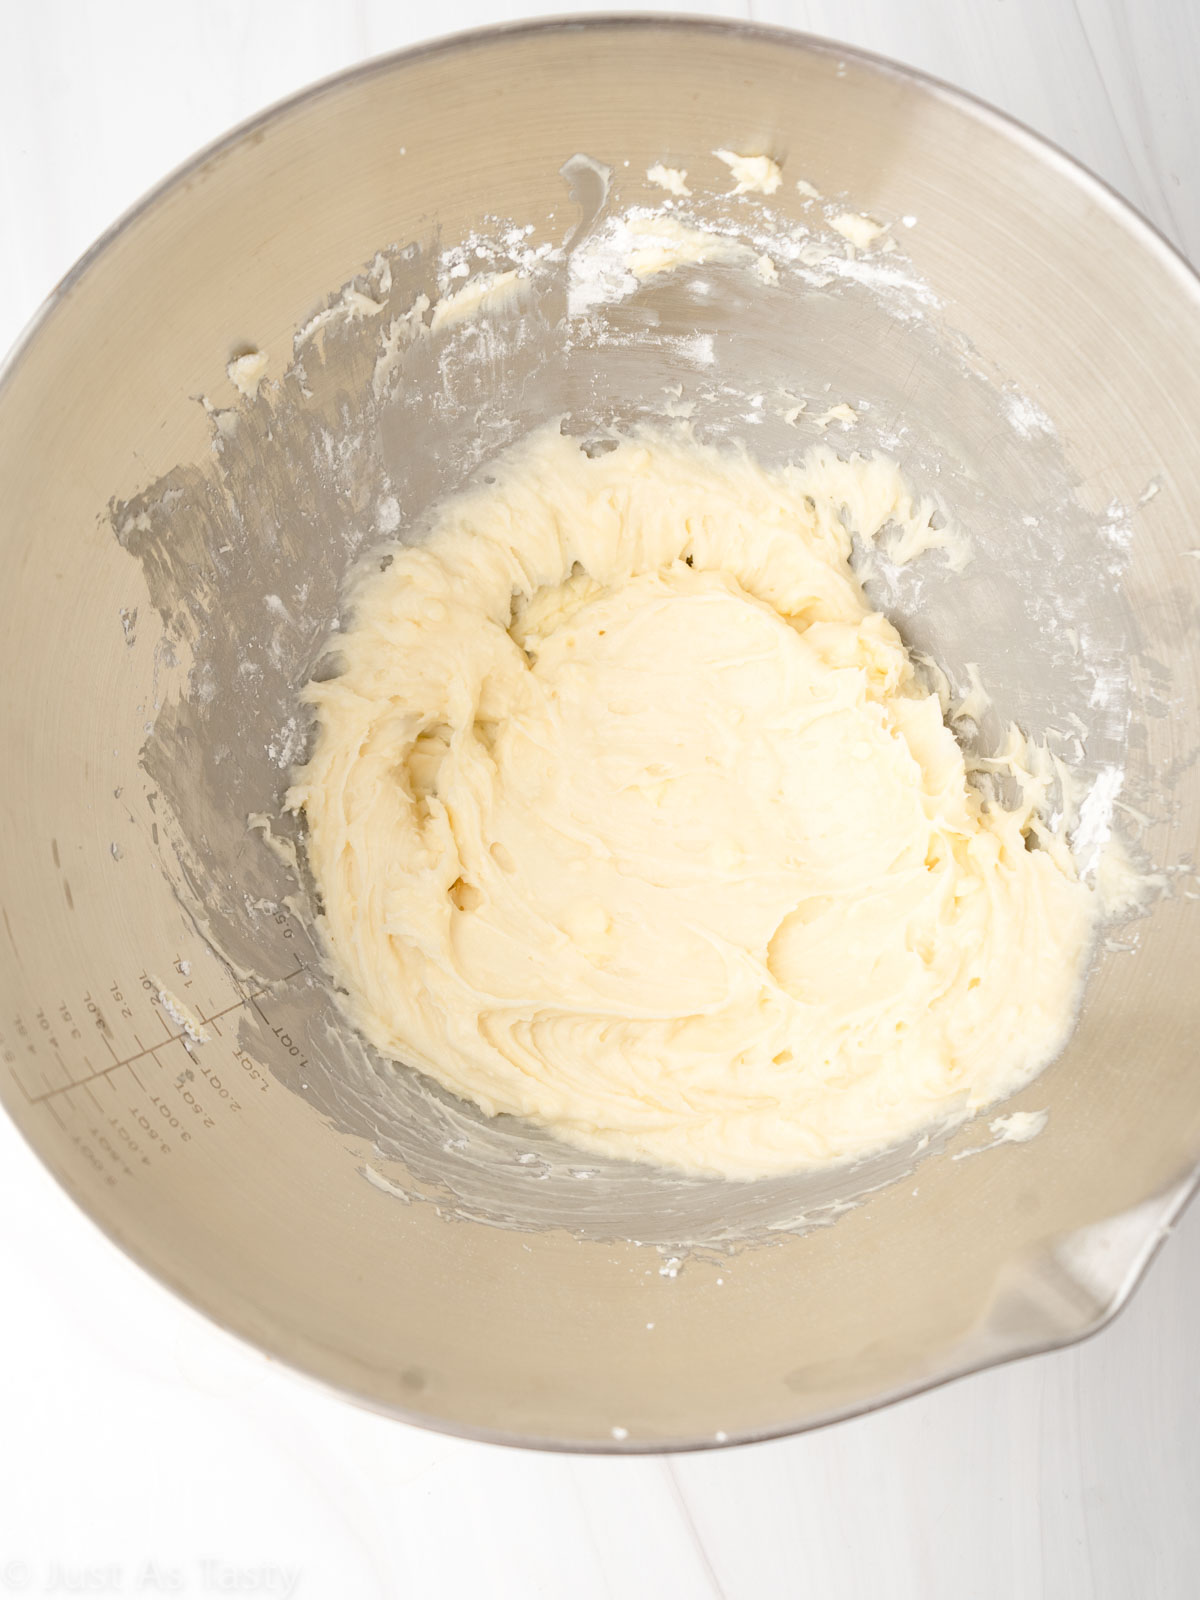 Cream cheese frosting in a mixing bowl.